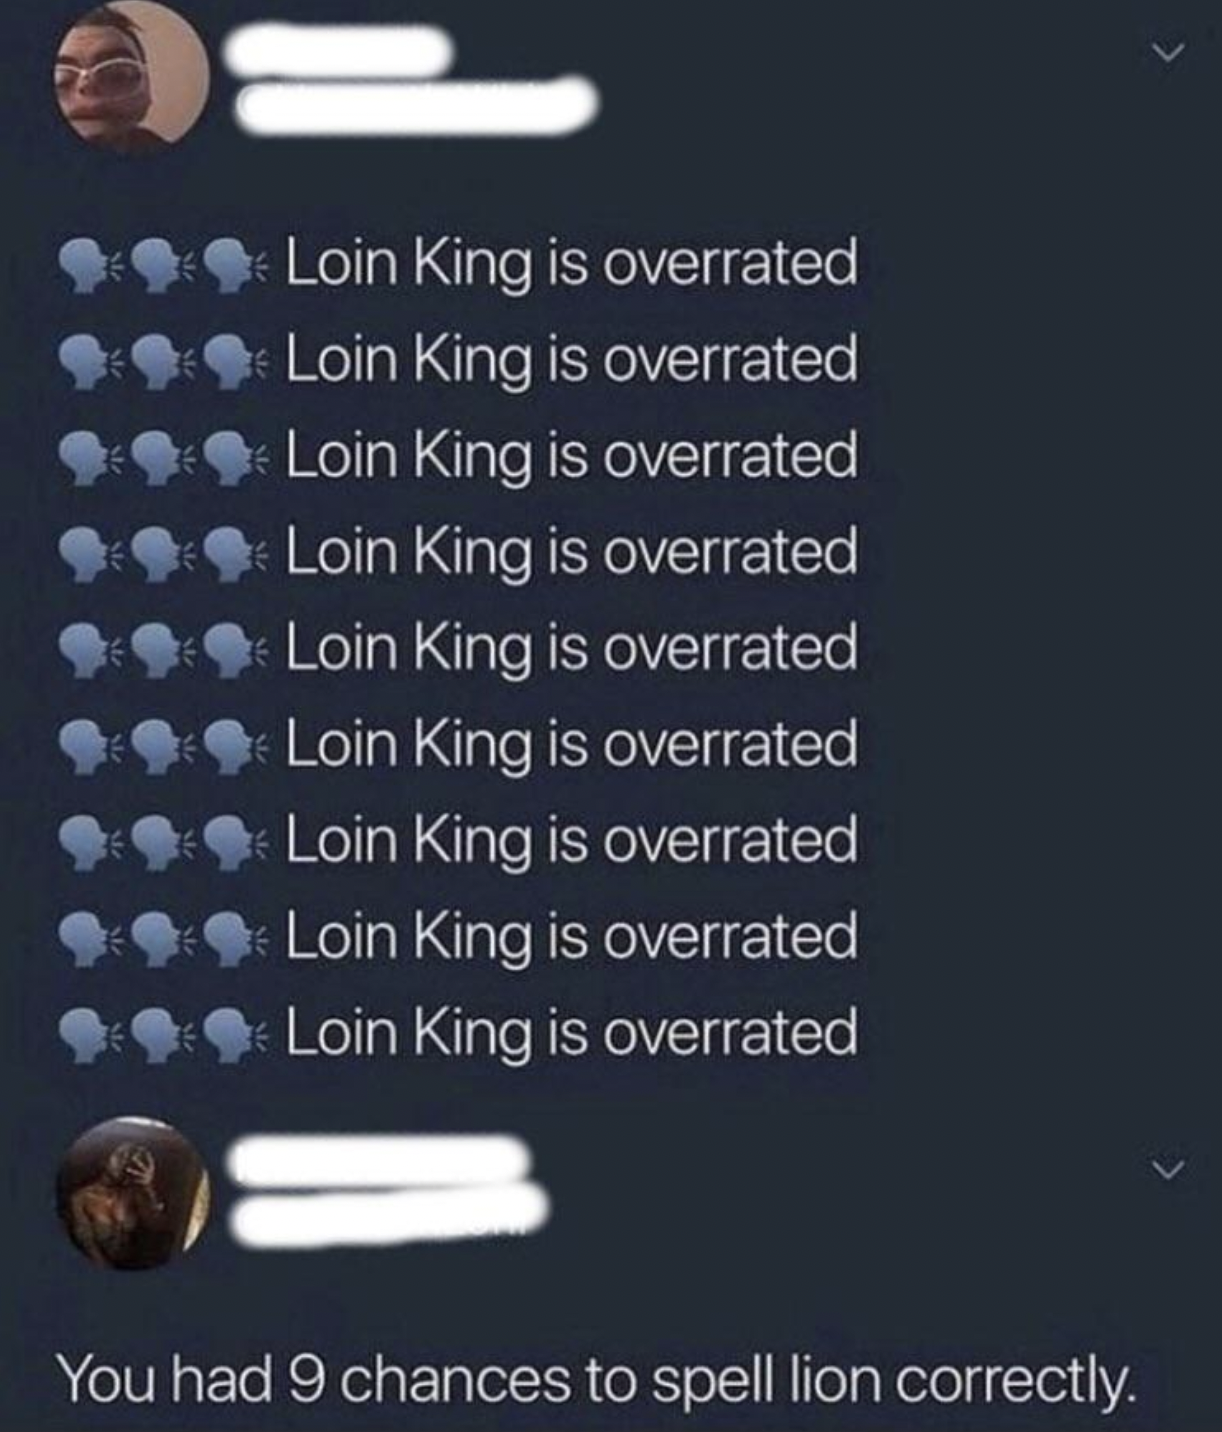 loin+king+is+overrated